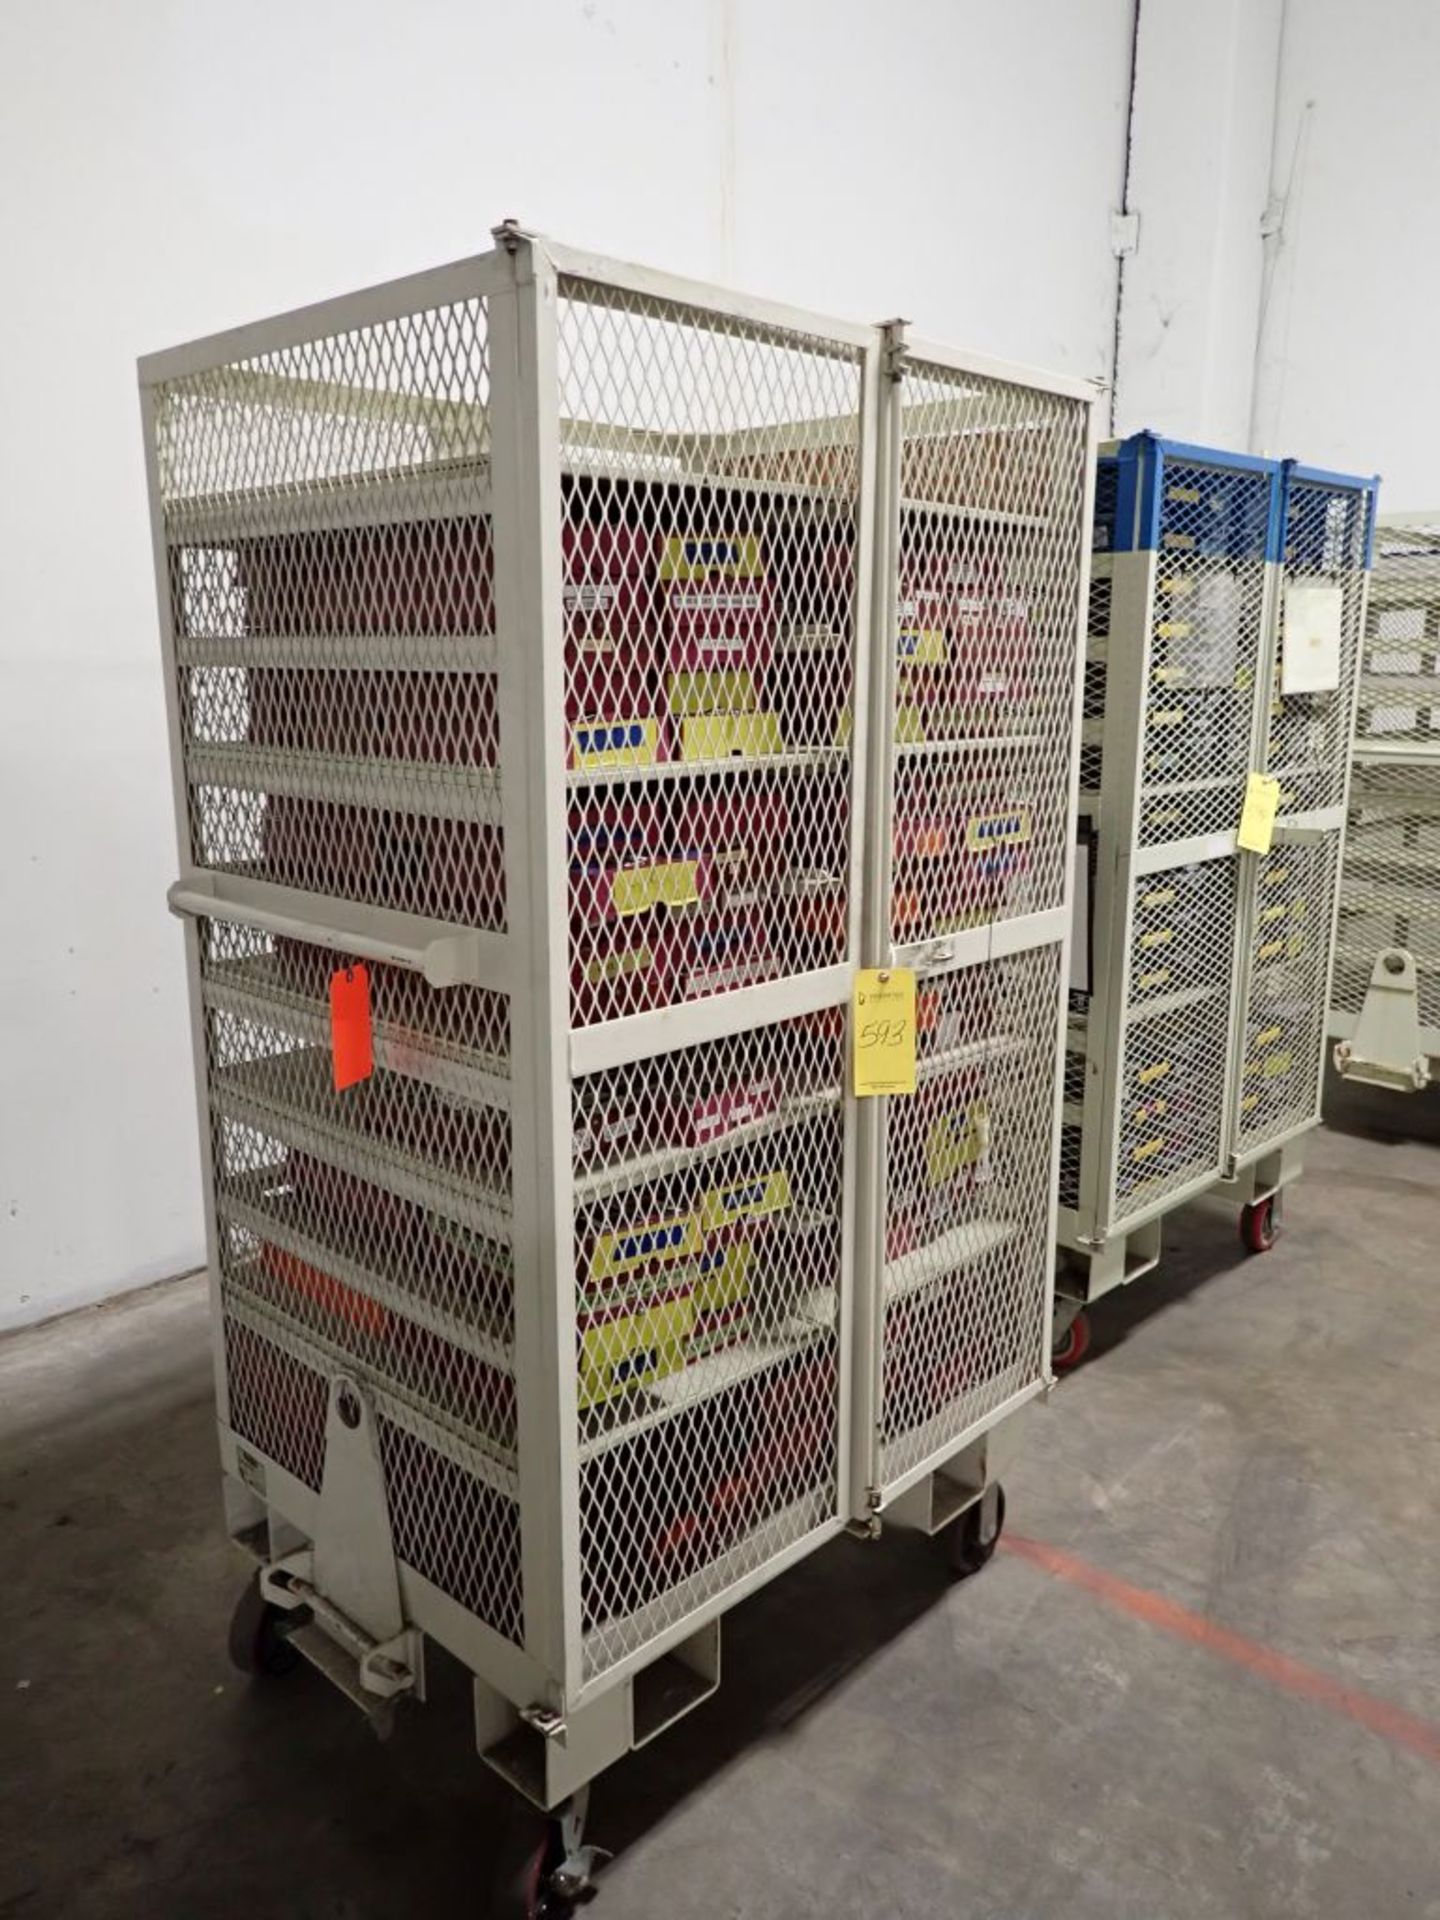 Rolling Locking Cage w/Storage Bins | Tag: 241593 | Limited Forklift Assistance Available - $10.00 - Image 2 of 6